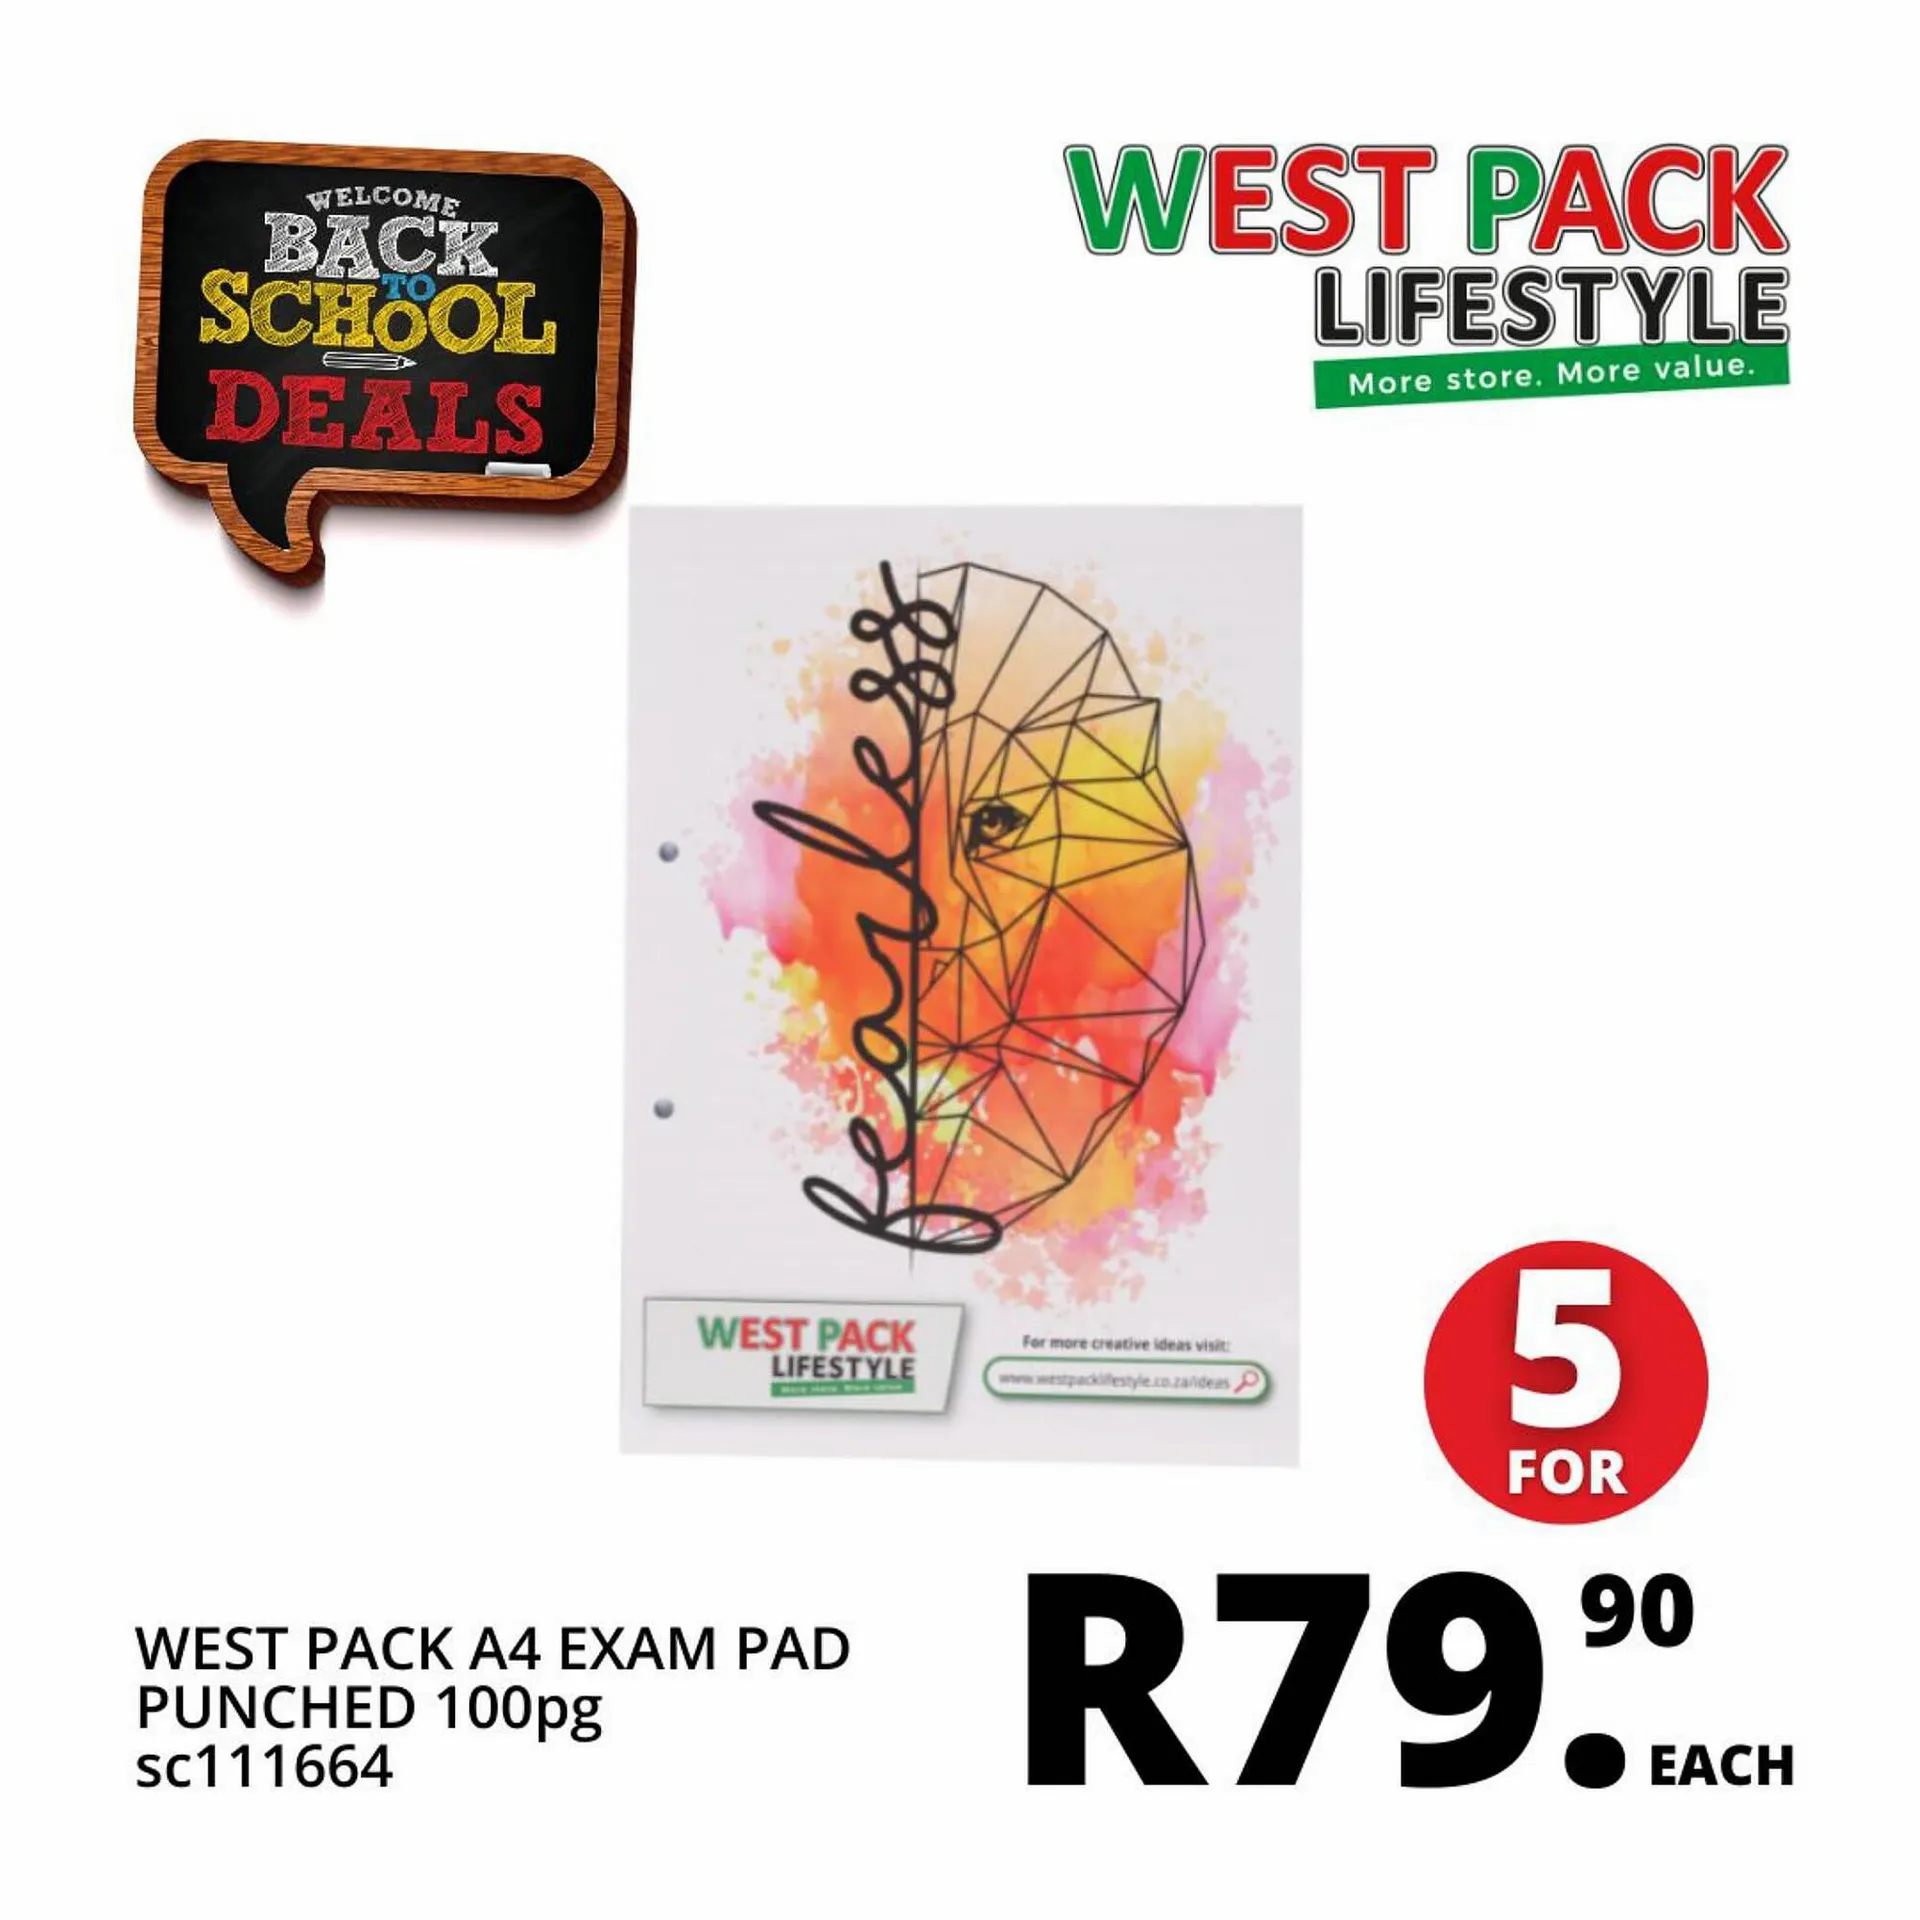 West Pack Lifestyle catalogue - 4